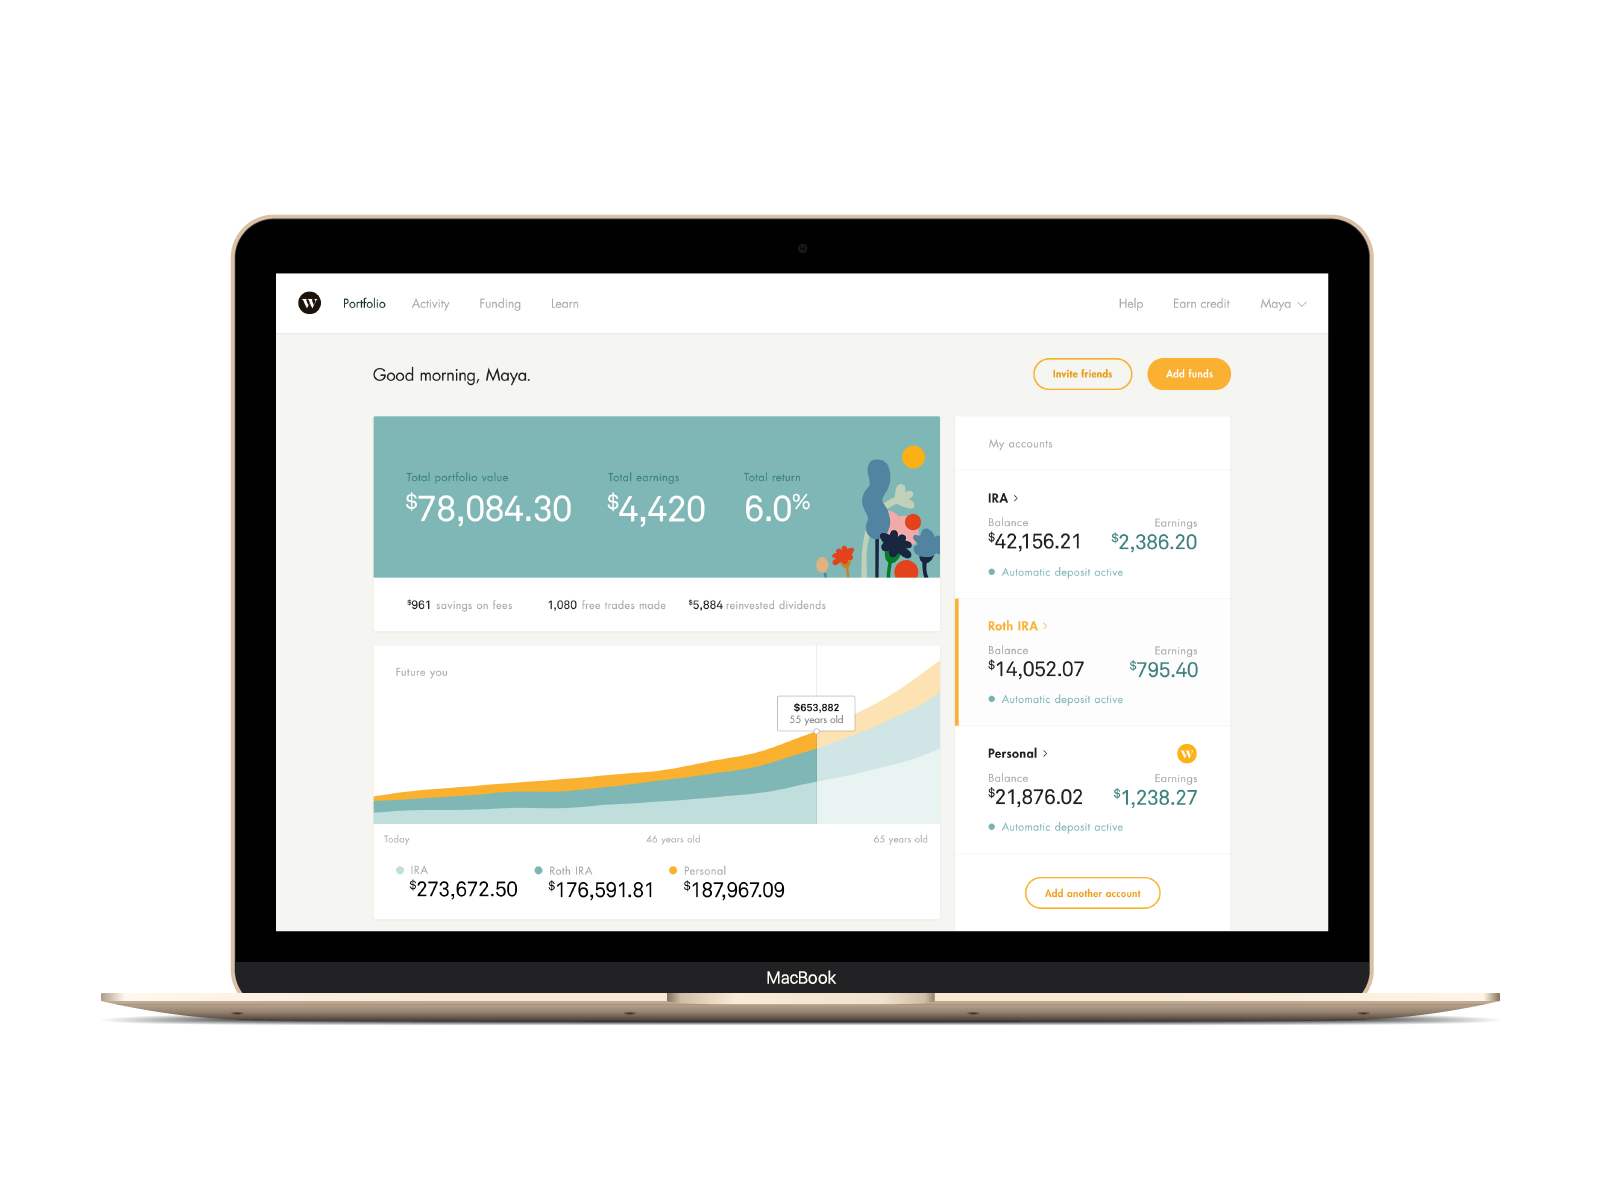 FinTech Startup Wealthsimple Has Raised $37 Million to Provide New Financial Advisory